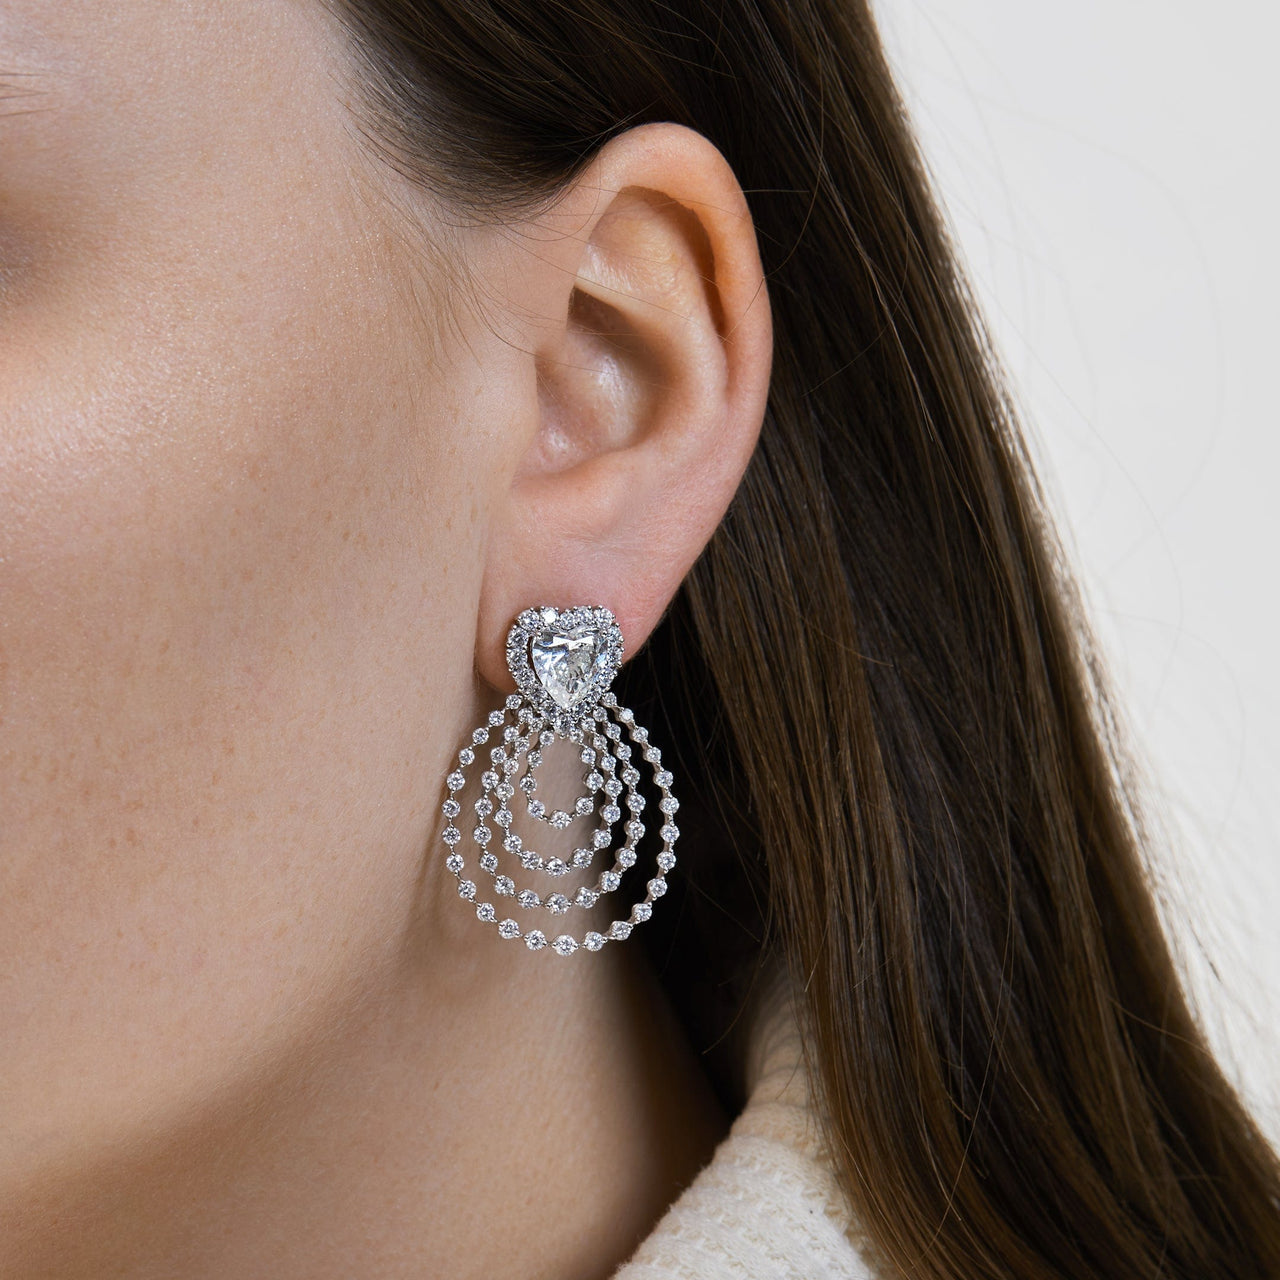 Baguette and Pave Diamond Drop White Gold Earrings